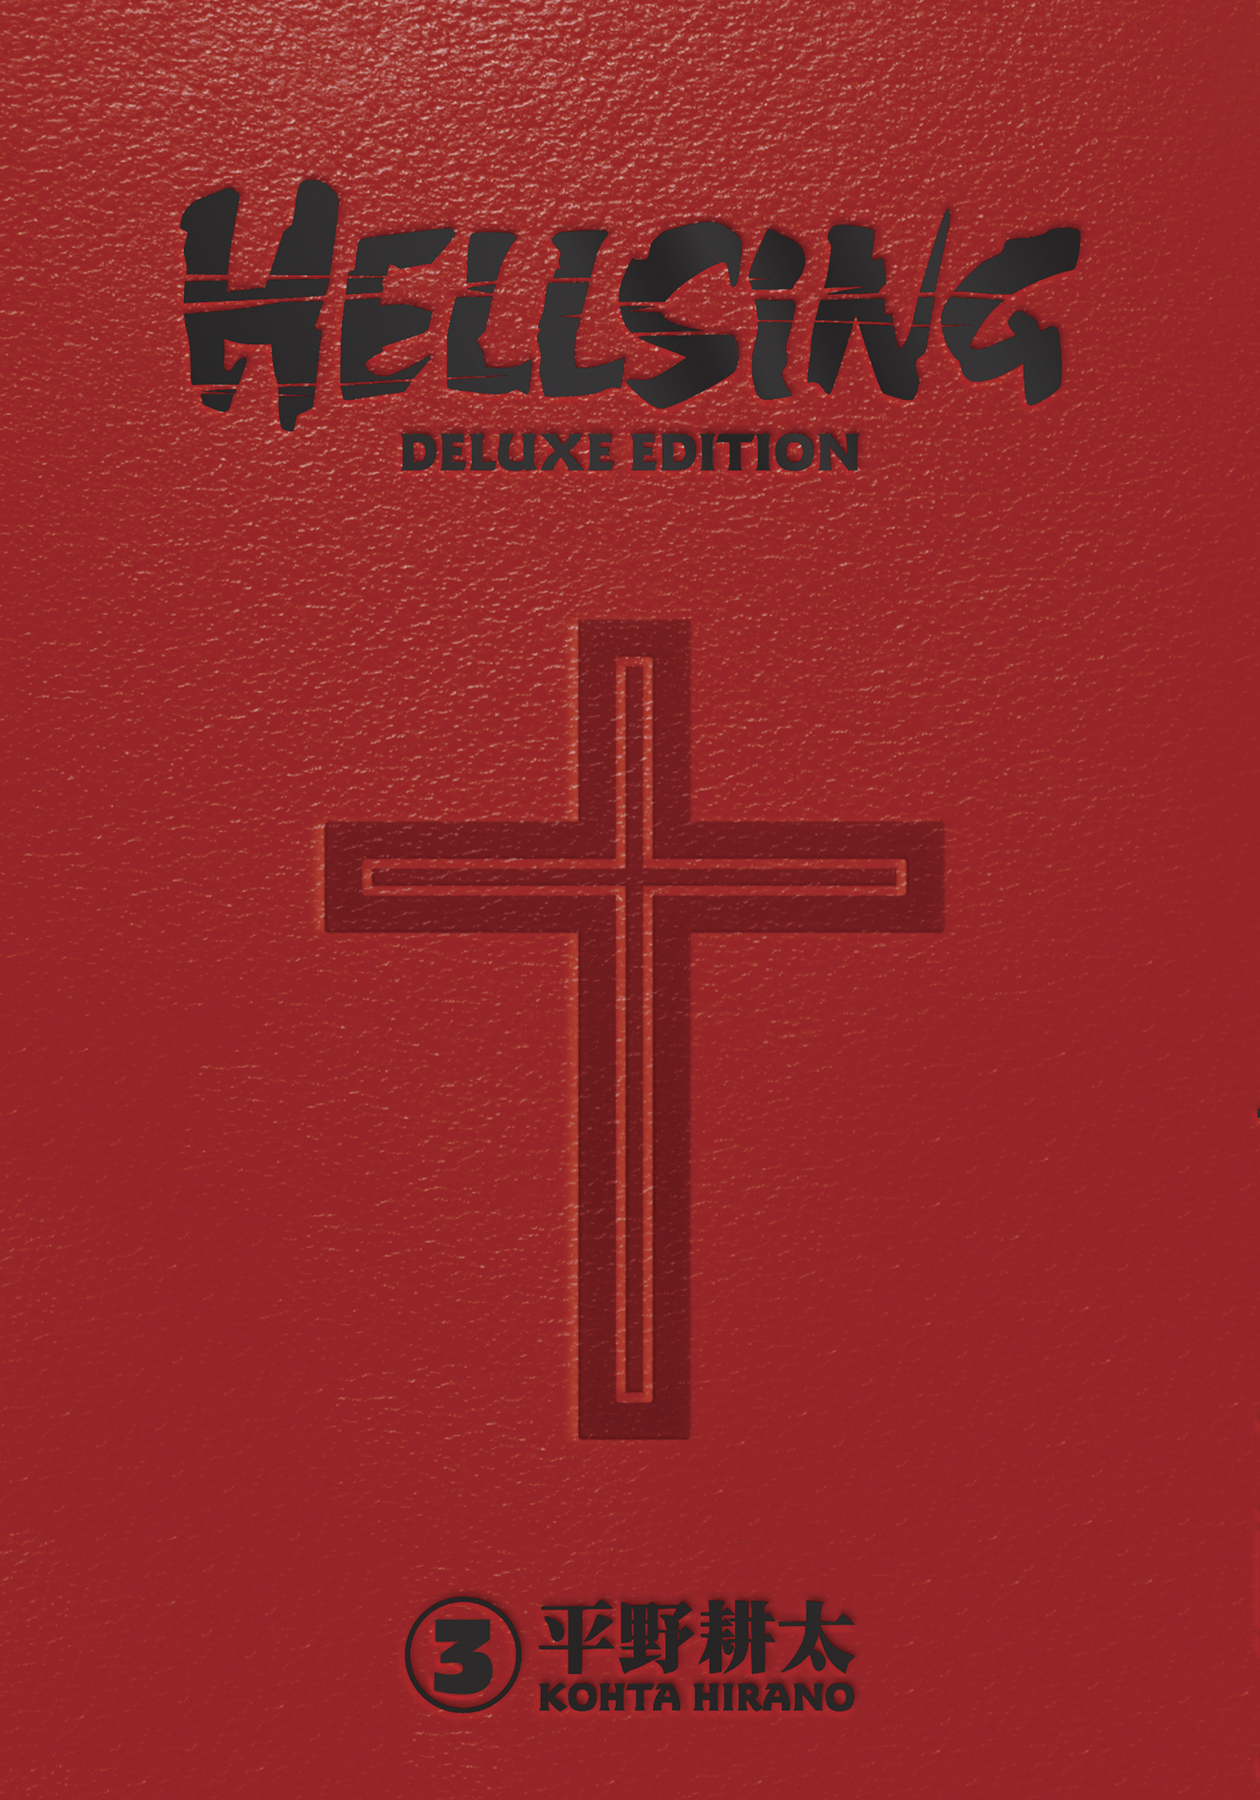 Hellsing Deluxe Edition Hardcover Volume 3 (Mature)